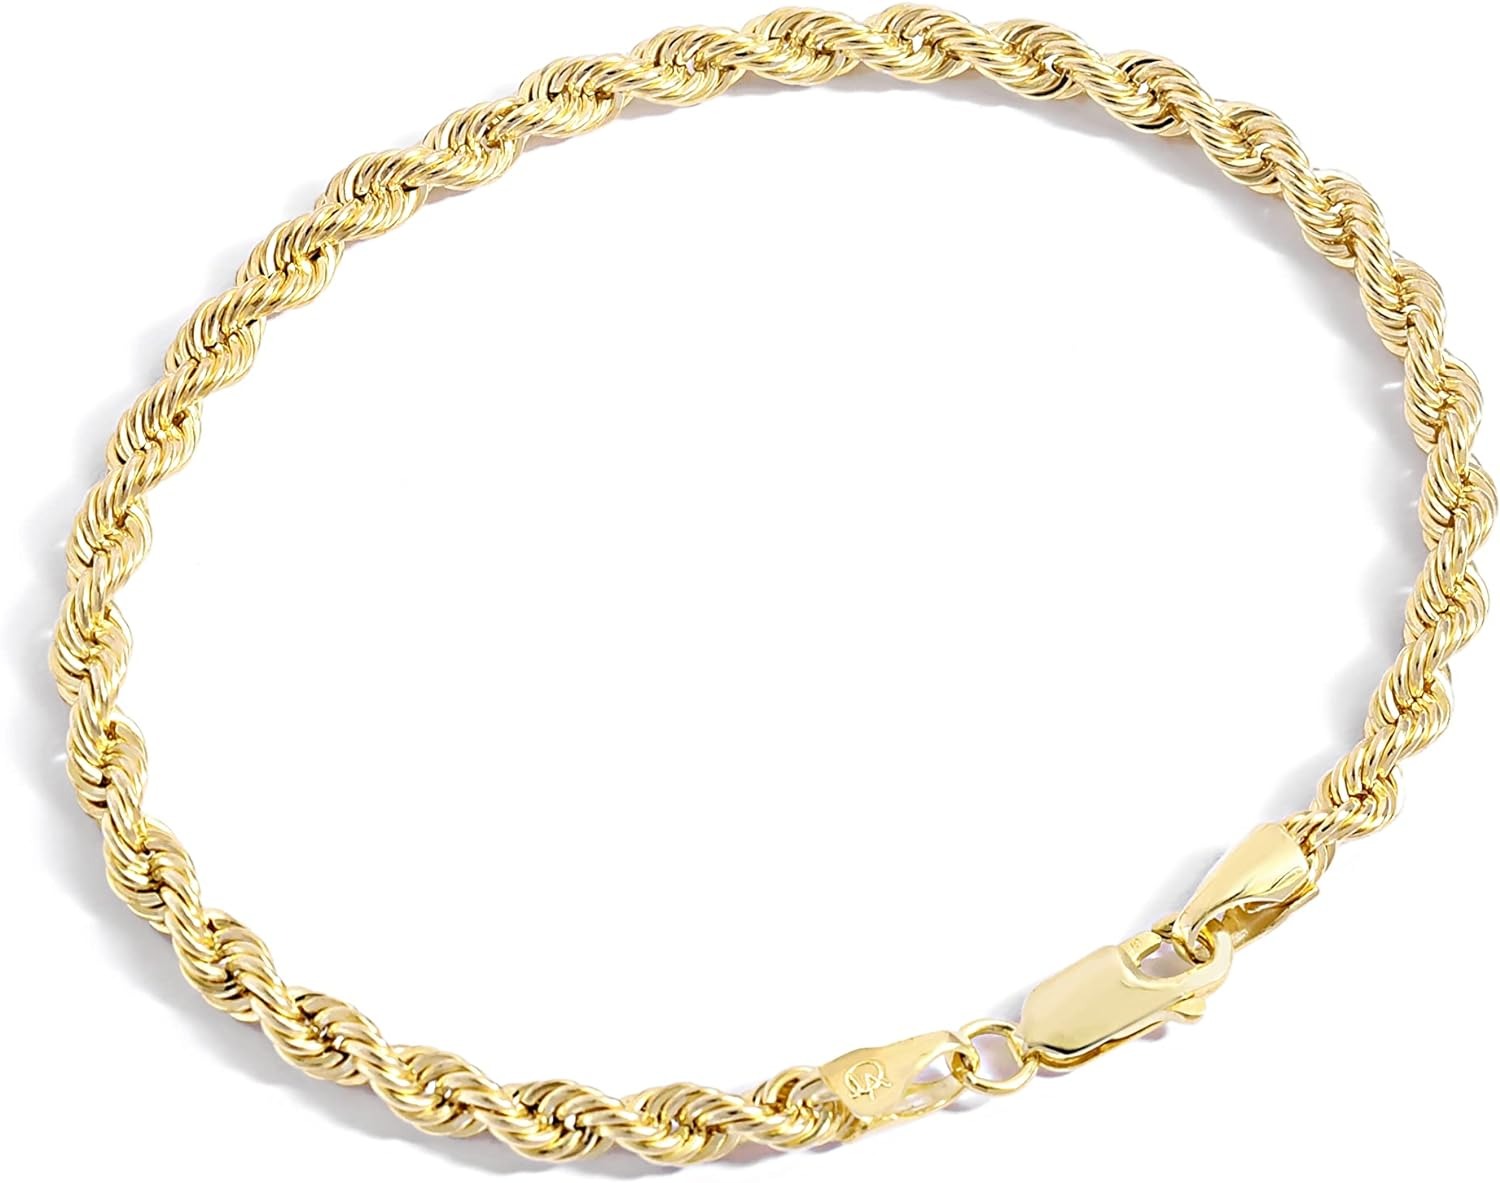 Jewelry Atelier Gold Filled Chain Bracelet Collection - 14K Solid Yellow Gold Filled Rope Chain Bracelets for Women and Men with Different Sizes (2.7mm, 3.8mm)